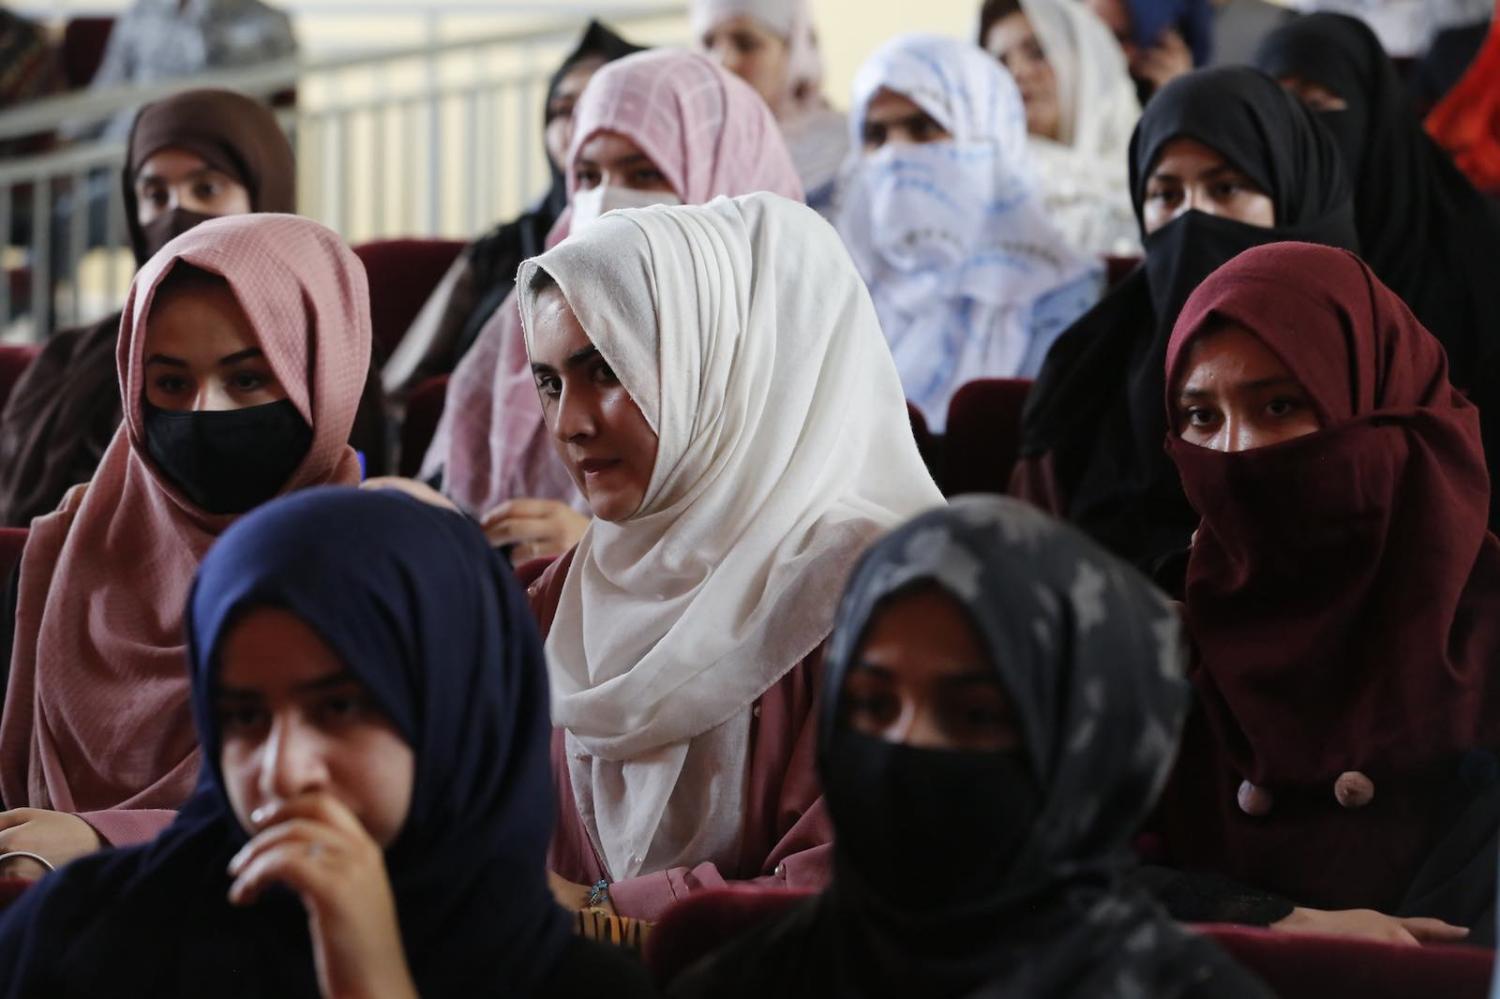 A human rights seminar on the role of women in ongoing peace efforts drew hundreds of participants In Kunduz, Afghanistan, September 2019 (Fardin Waezi/UNAMA/Flickr)